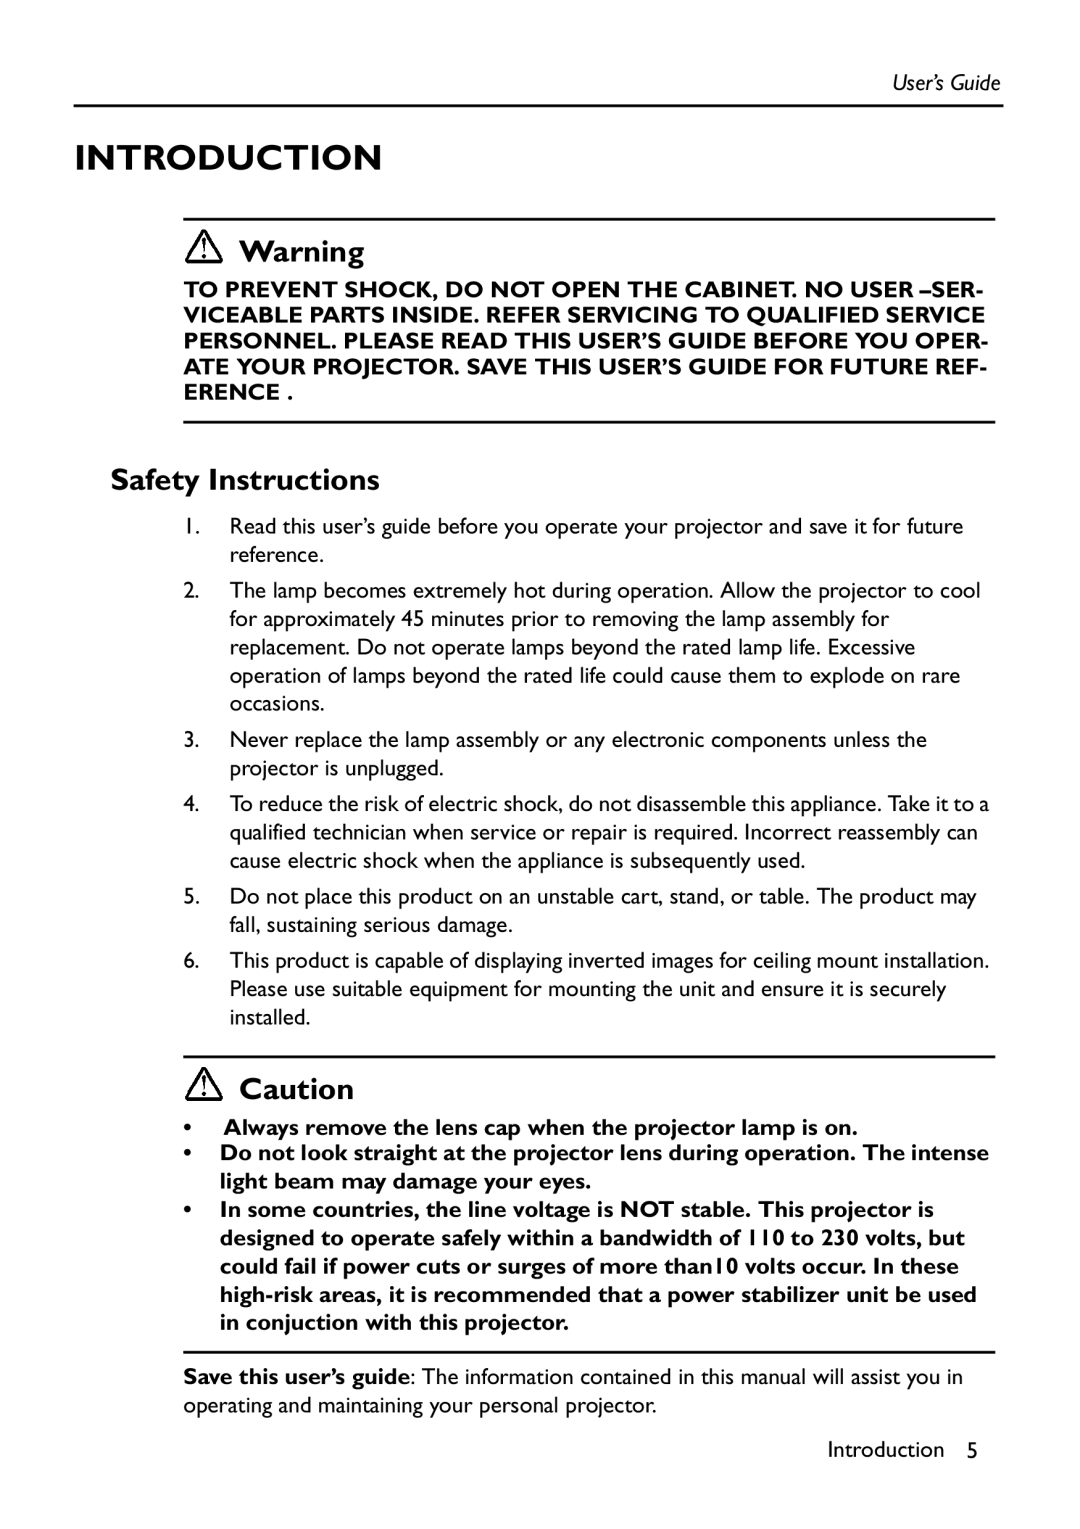 HP Vp6111 manual Introduction, Safety Instructions 